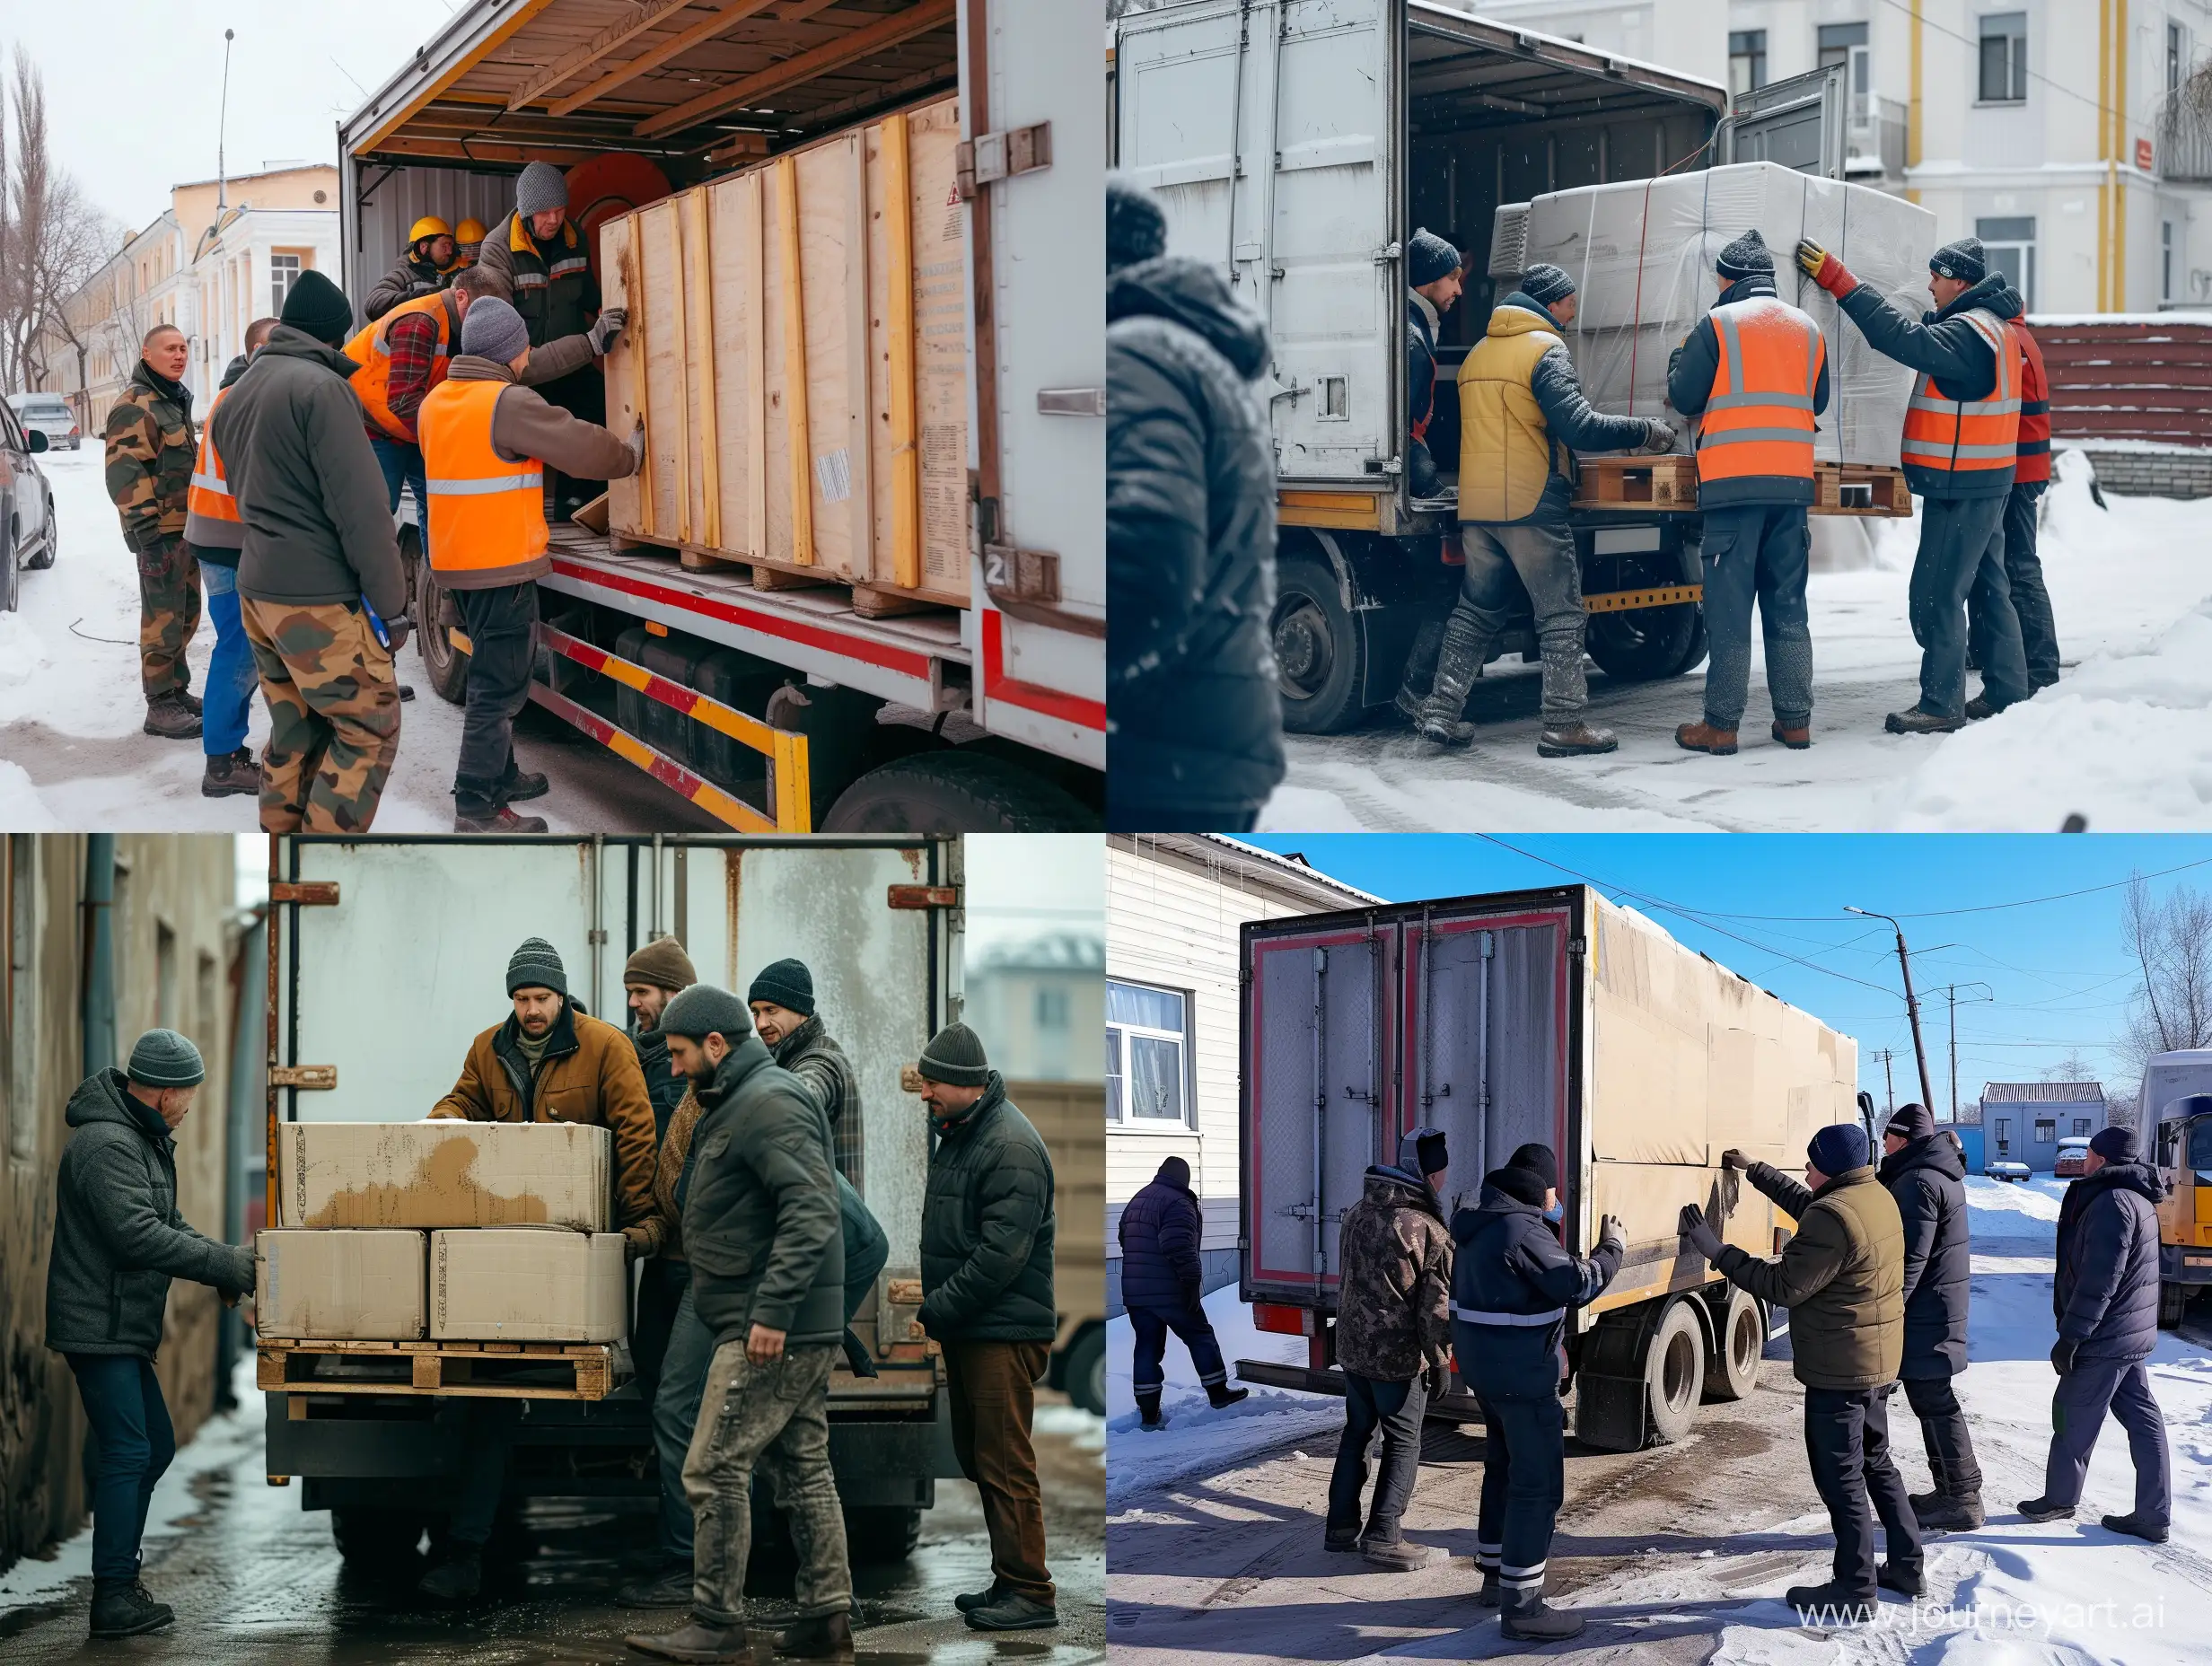 Efficient-Handymen-Unloading-Truck-with-Foreman-Supervision-in-Realistic-Quality-Russia